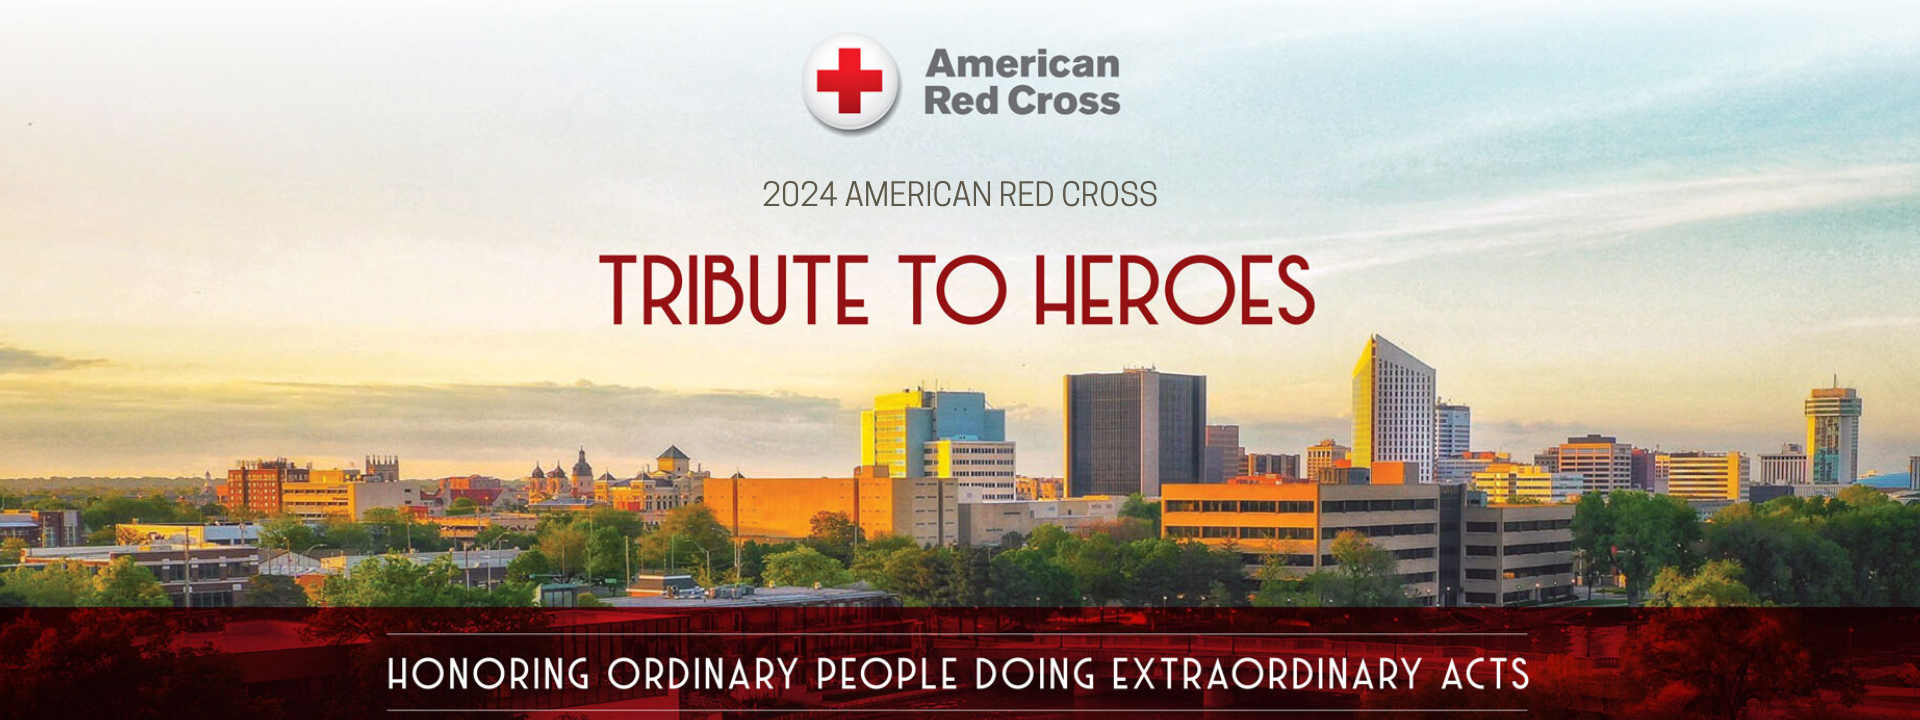 2024 tribute to heroes graphic